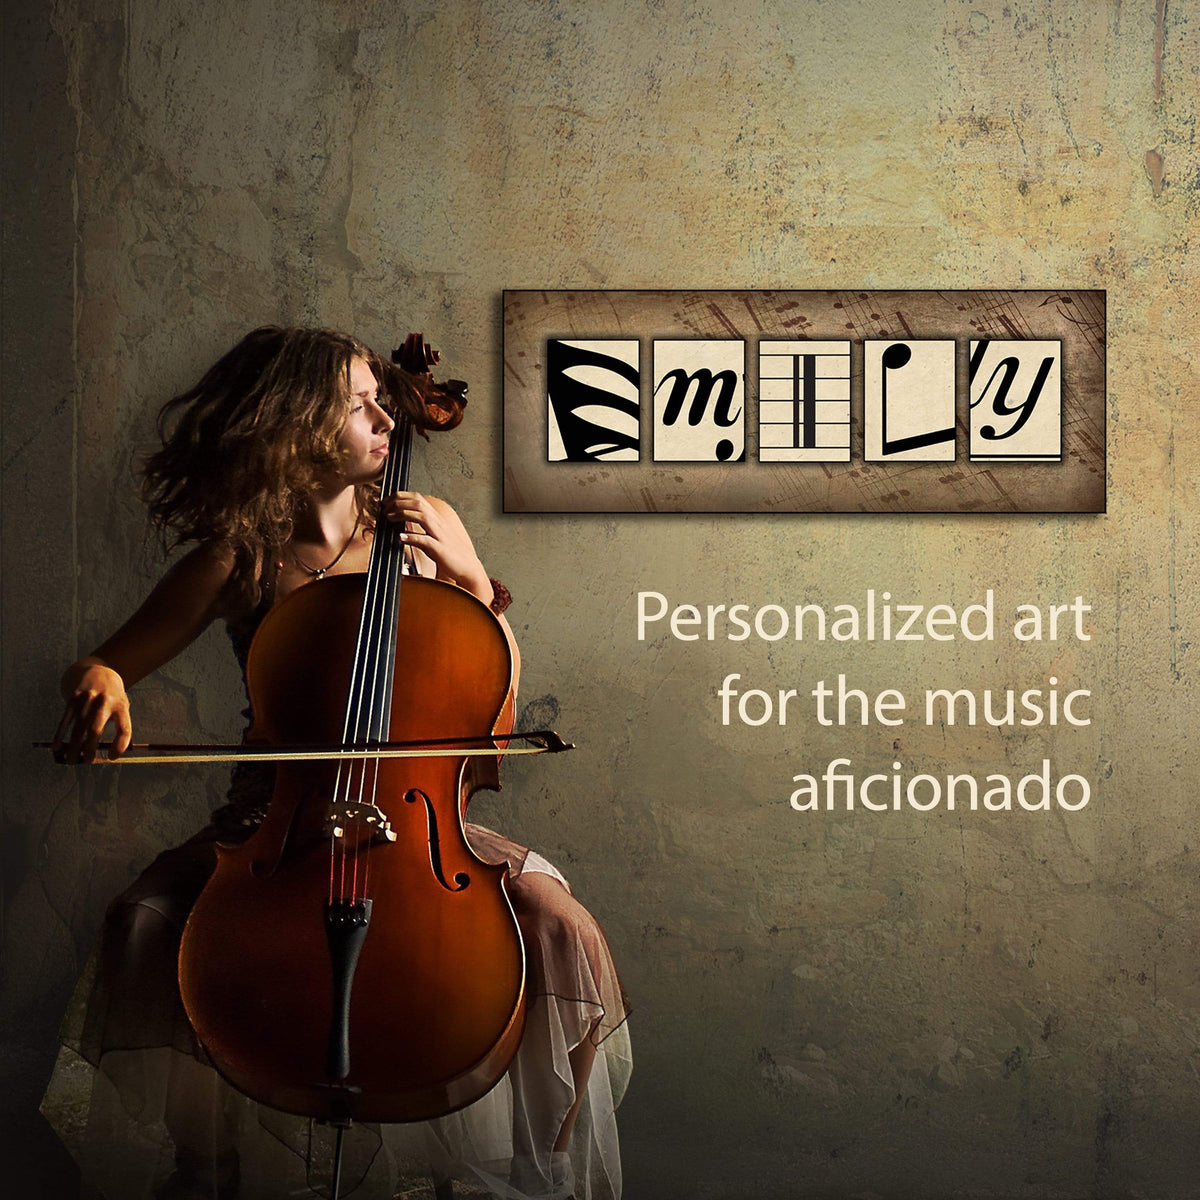 Personalized art for musician from Personal-Prints